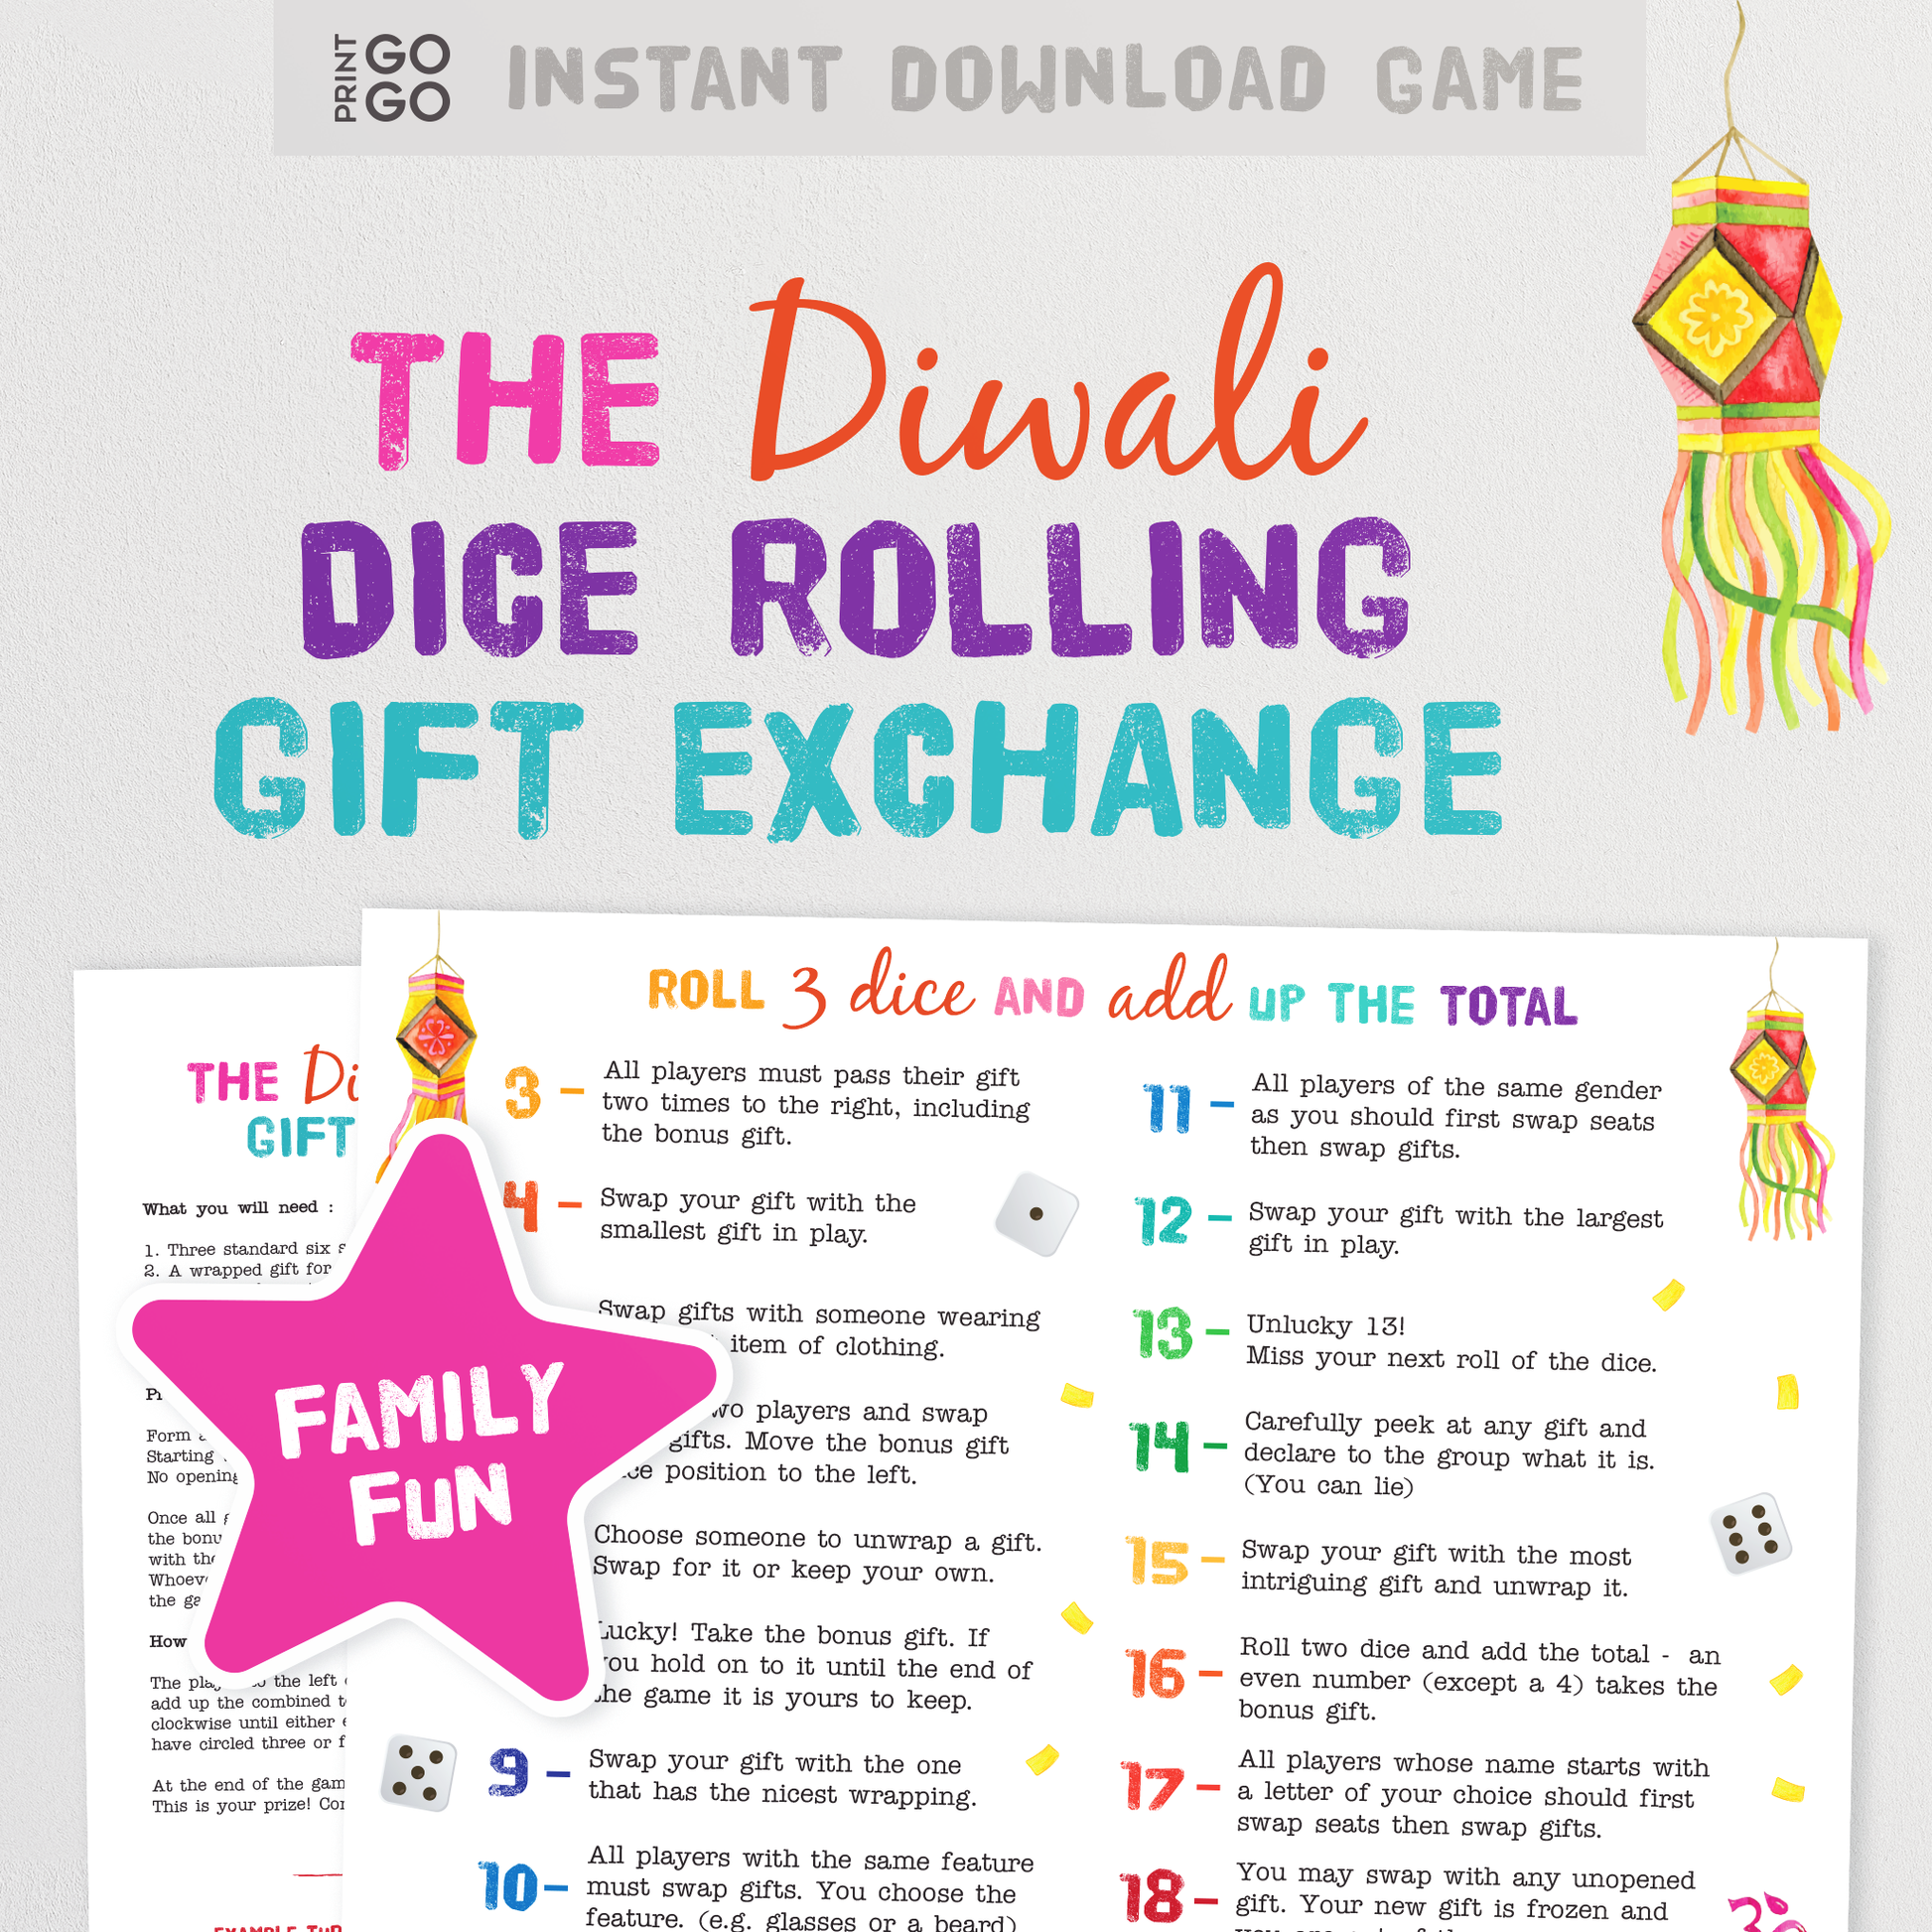 Christmas Roll the Dice Gift Exchange - Hilarious Yankee Swap Game